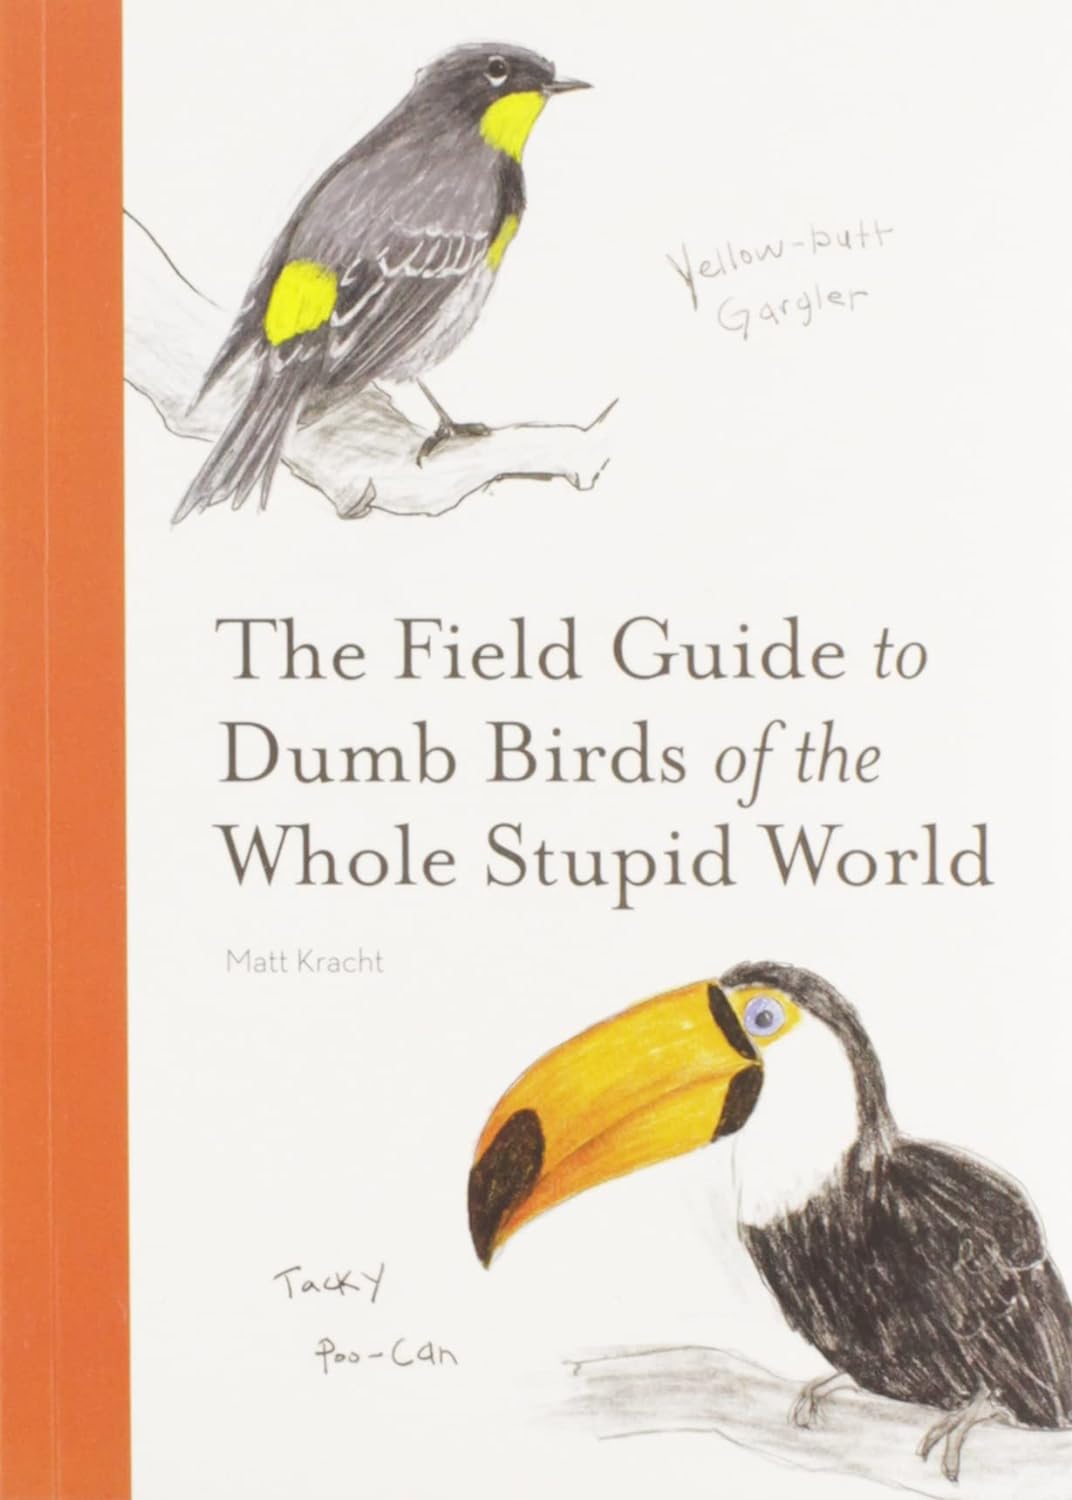 FIELD GUIDE TO DUMB BIRDS OF WHOLE STUPID WORLD - Out of the Blue